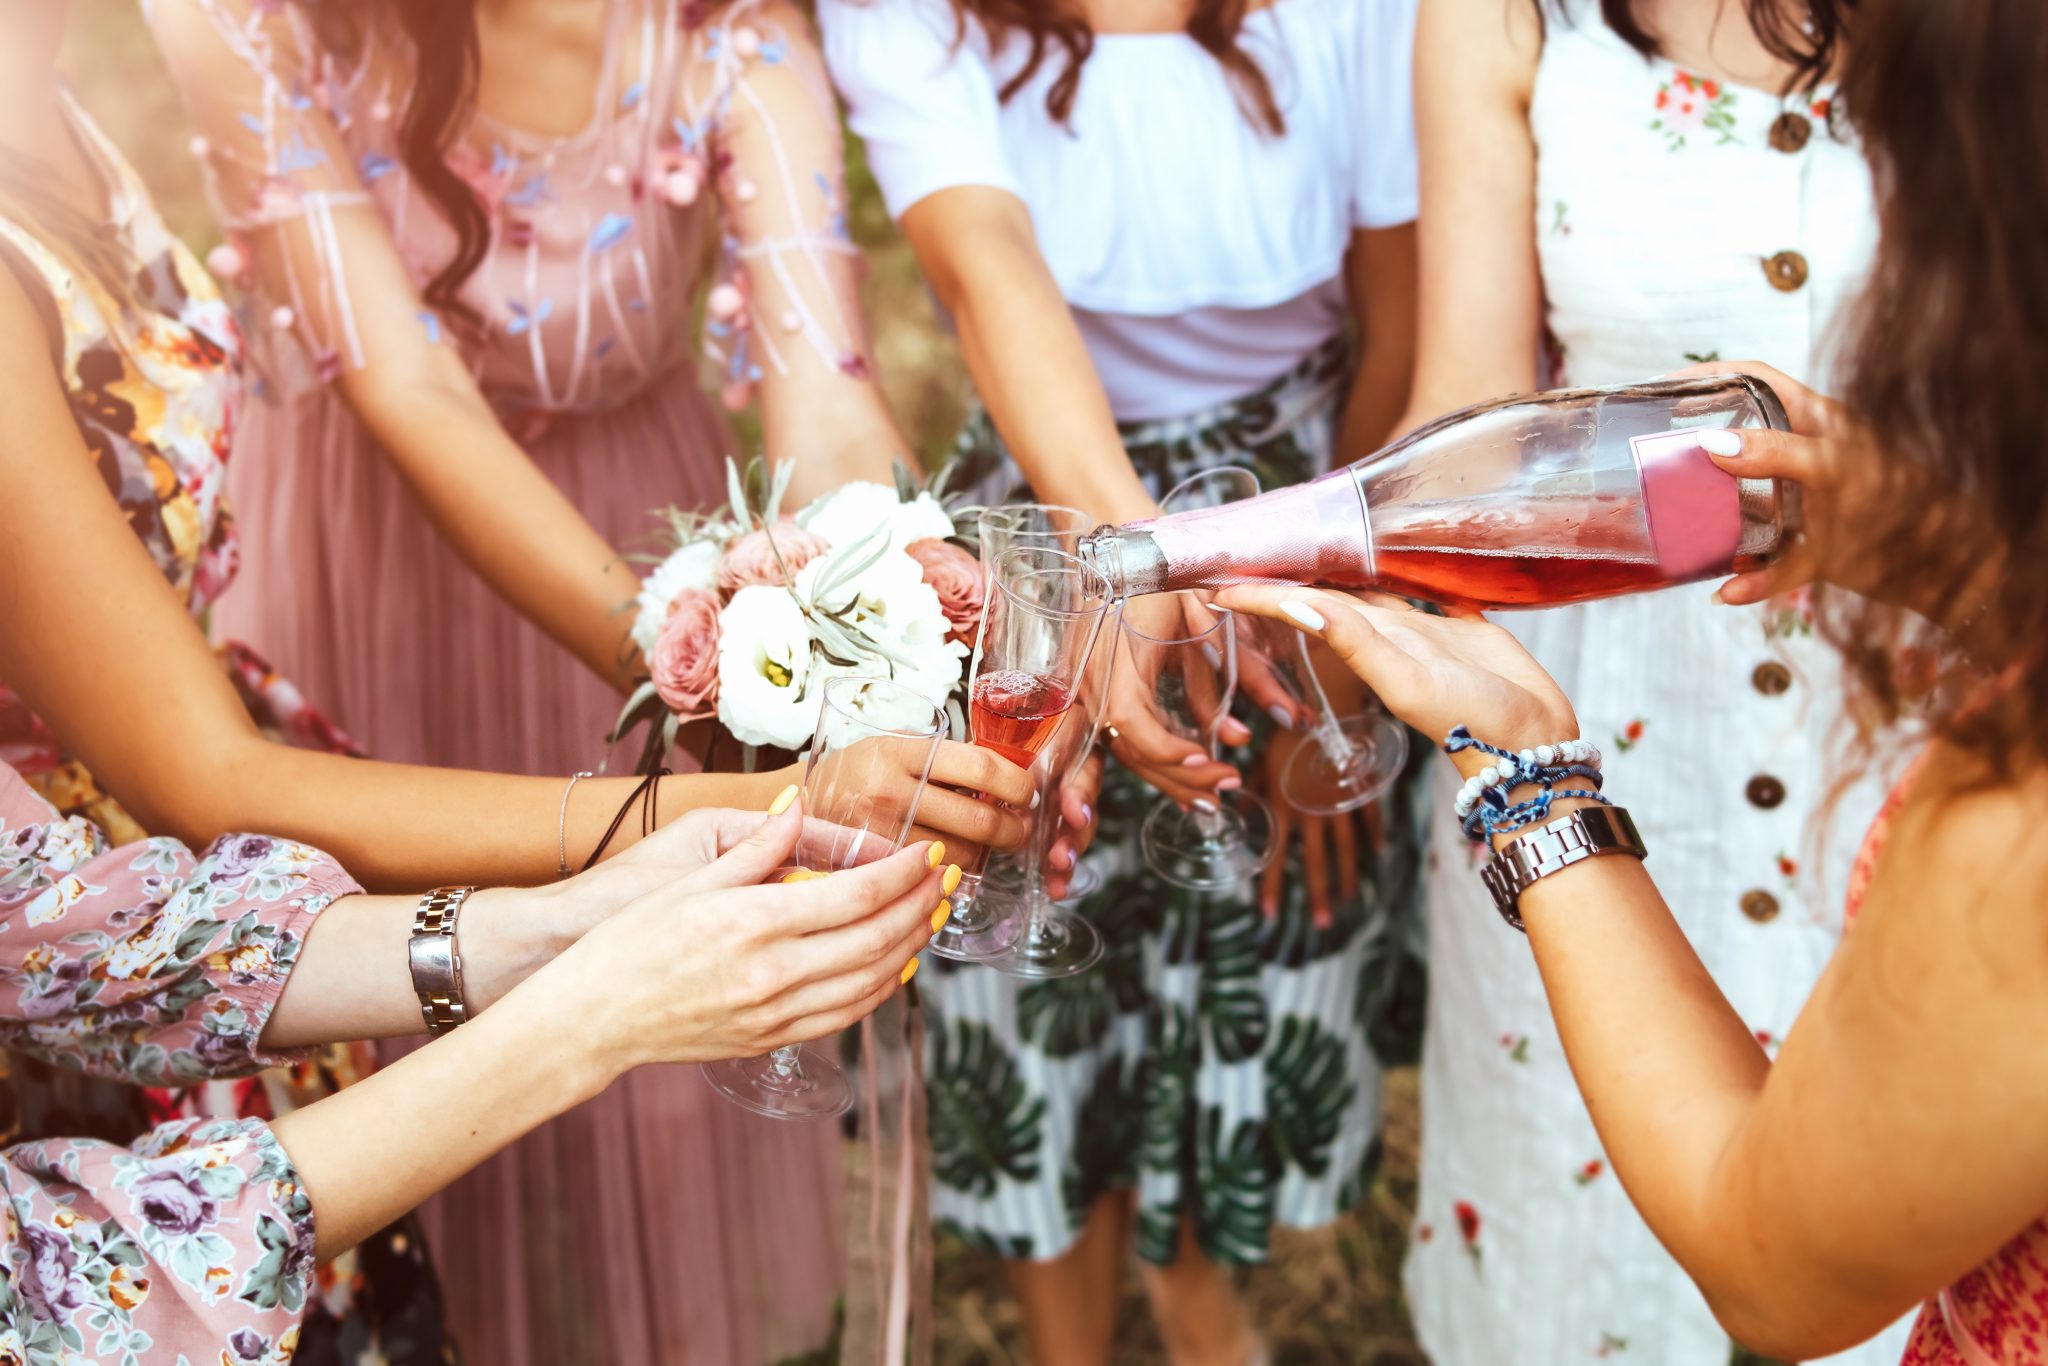 Champagne with glasses in girls hands at hen / bachelorette party outdoor